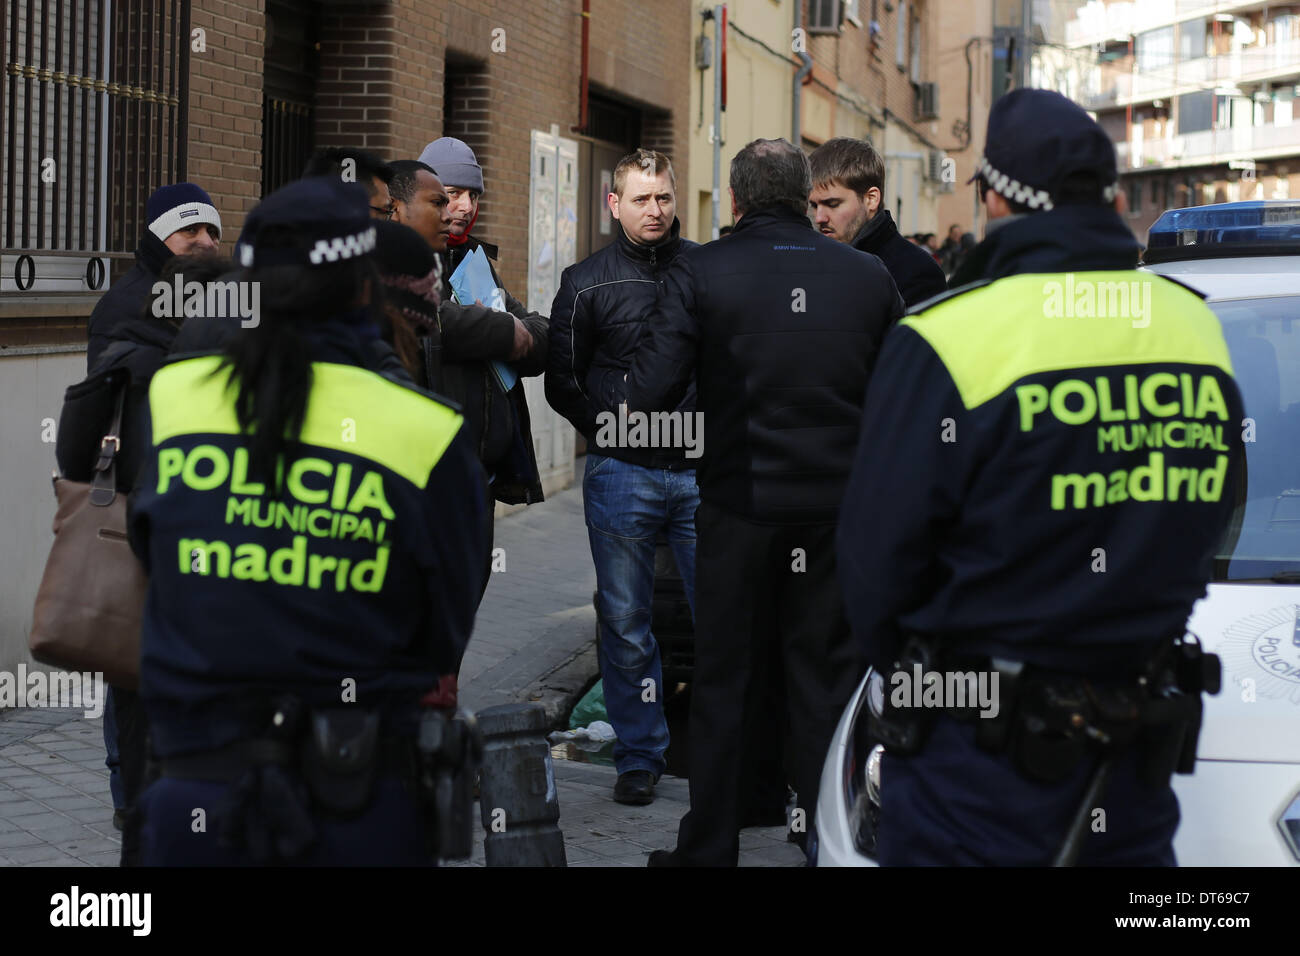 Madrid, Spain. 10th Feb, 2014. 30 year-old Iban Labici (middle) negotiates with the judicial commission as he waits to be evicted from his home in Madrid, Spain, Monday, Feb. 10th 2014. 30 year-old Iban Labici, with his partner 29 year-old Lavinia Uta from Romania were evicted from their previous home owned by '' La Caixa'' in 2010 when they lost their jobs due to the financial crisis. Iban's brother, 38 year-old Mihail Labici offered them one of his two homes whose mortgages were contracted with Banco Sabadell. 38 year-old Mihail Labici in the past led a construction company that went bankru Stock Photo